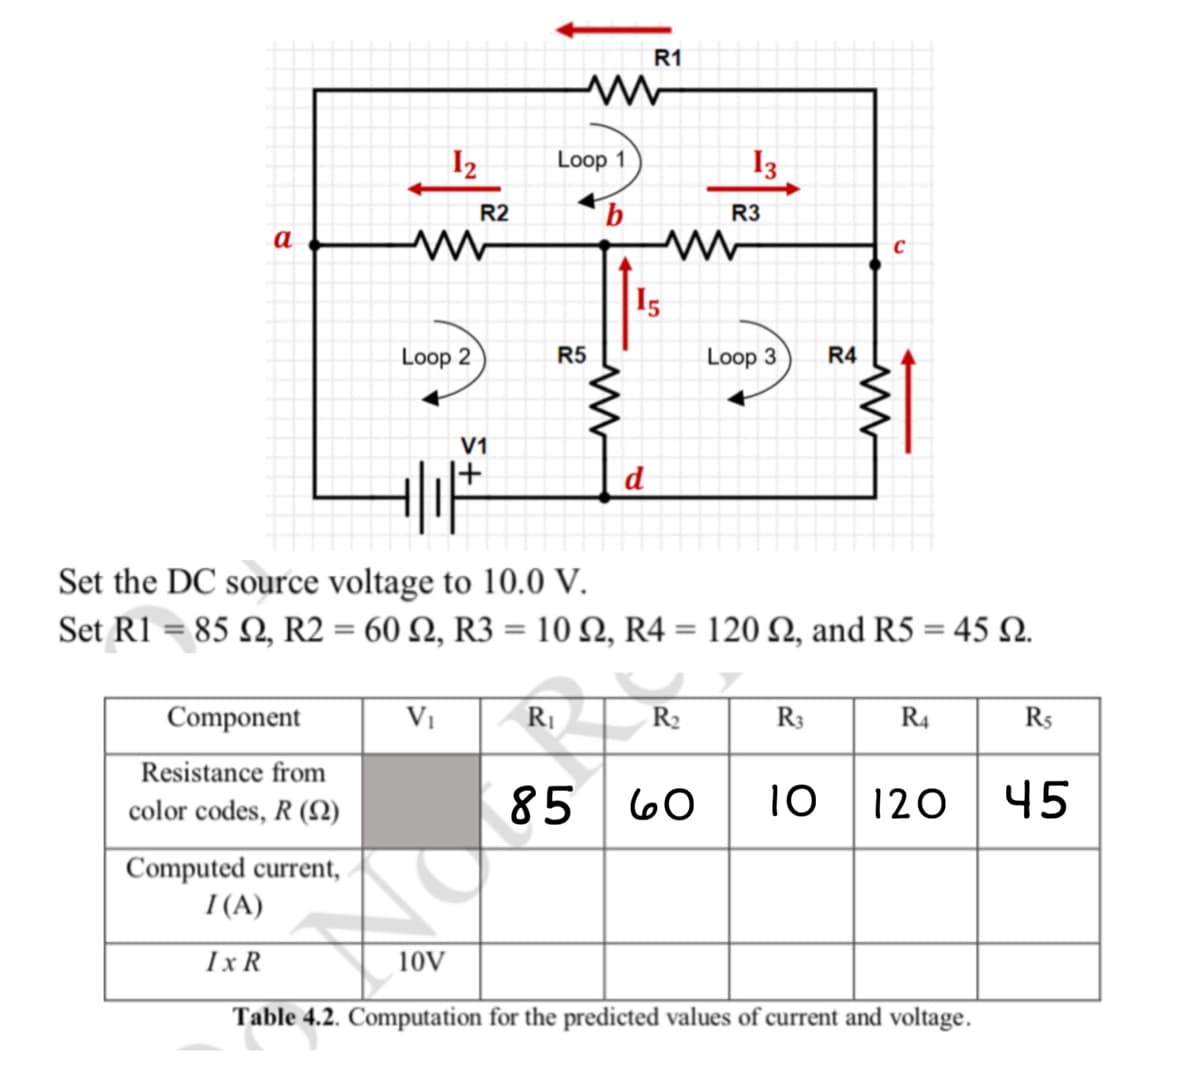 R1
I2
Loop 1
I3
R2
R3
a
|I5
Loop 2
R5
Loop 3
R4
V1
Set the DC source voltage to 10.0 V.
Set RI = 85 N, R2 = 60 N, R3 = 10 N, R4 = 120 N, and R5 = 45 N.
Component
Vi
RI
R2
R3
R4
Rs
Resistance from
color codes, R (2)
85
60| 10
120
45
Computed current,
I (A)
Ix R
10V
Table 4.2. Computation for the predicted values of current and voltage.
